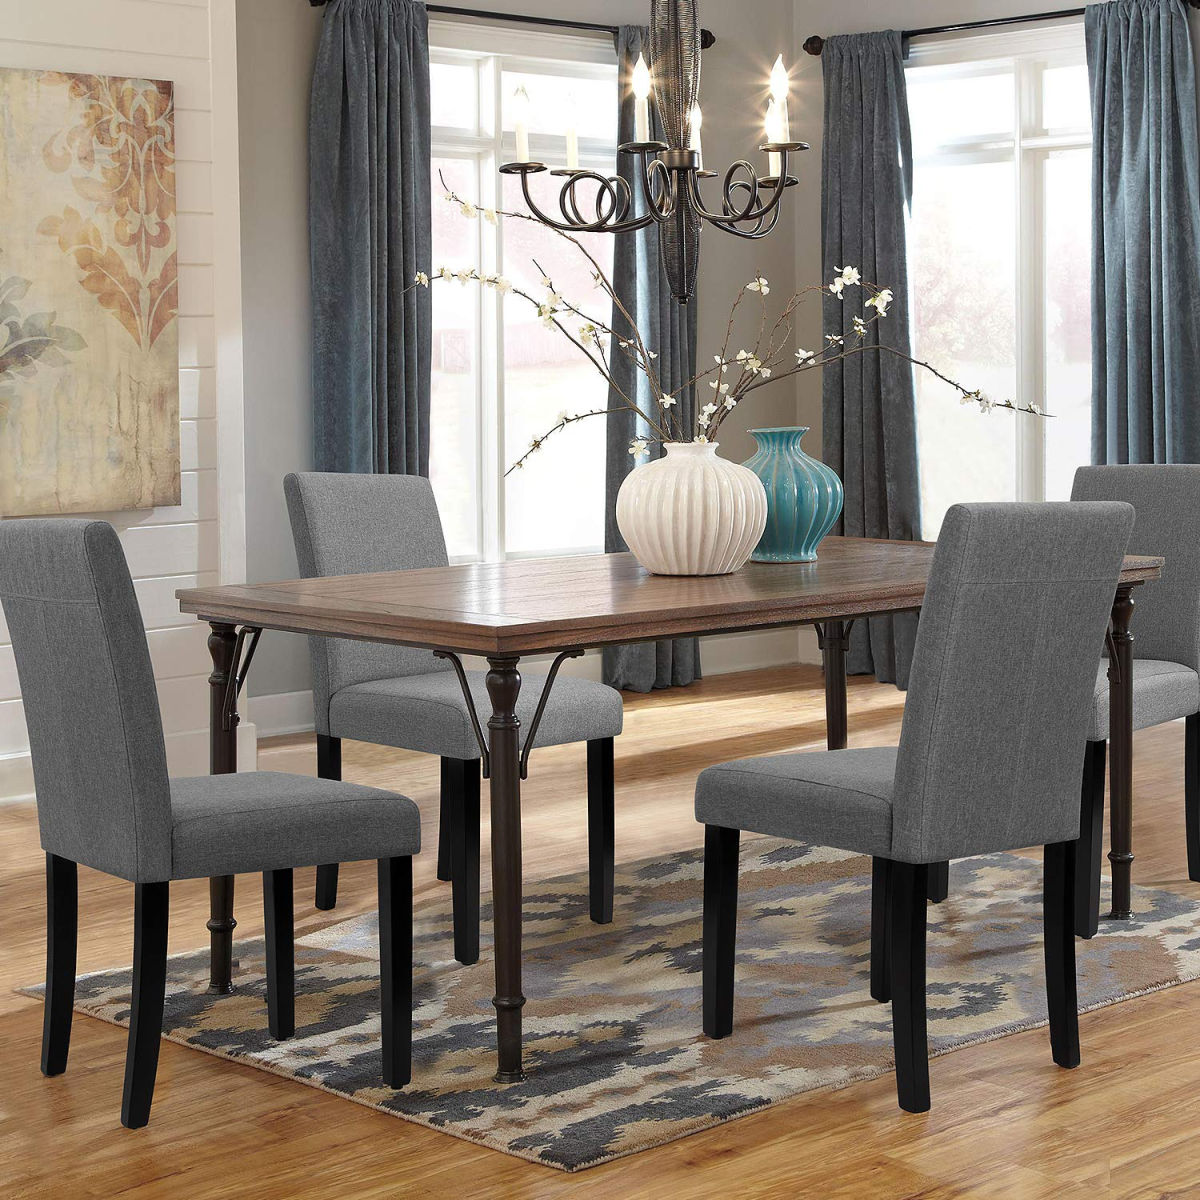 Walnew Modern Upholstered Dining Chairs